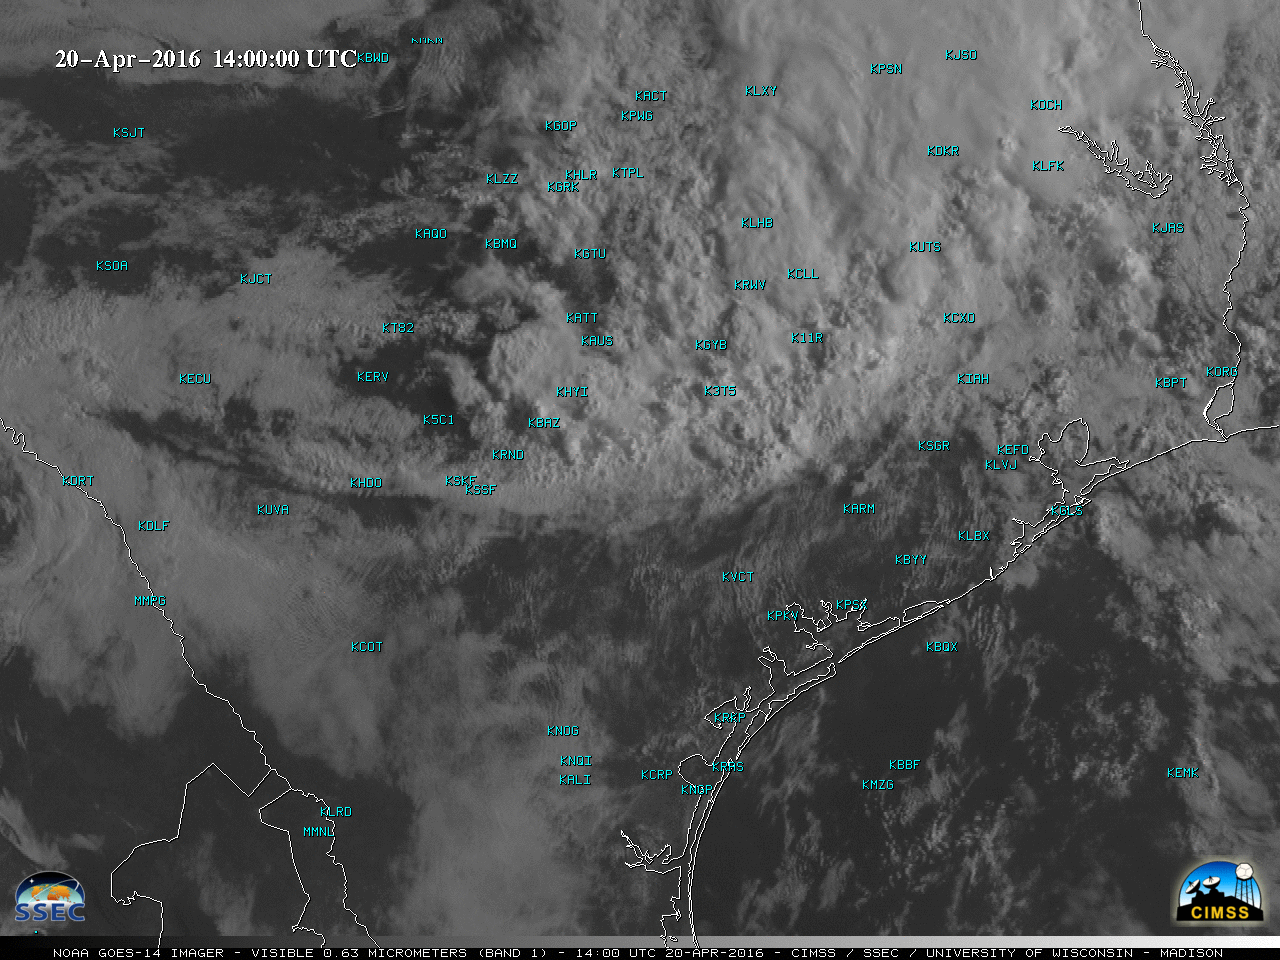 GOES-14 Visible (0.63 µm) images [click to play MP4 animation]